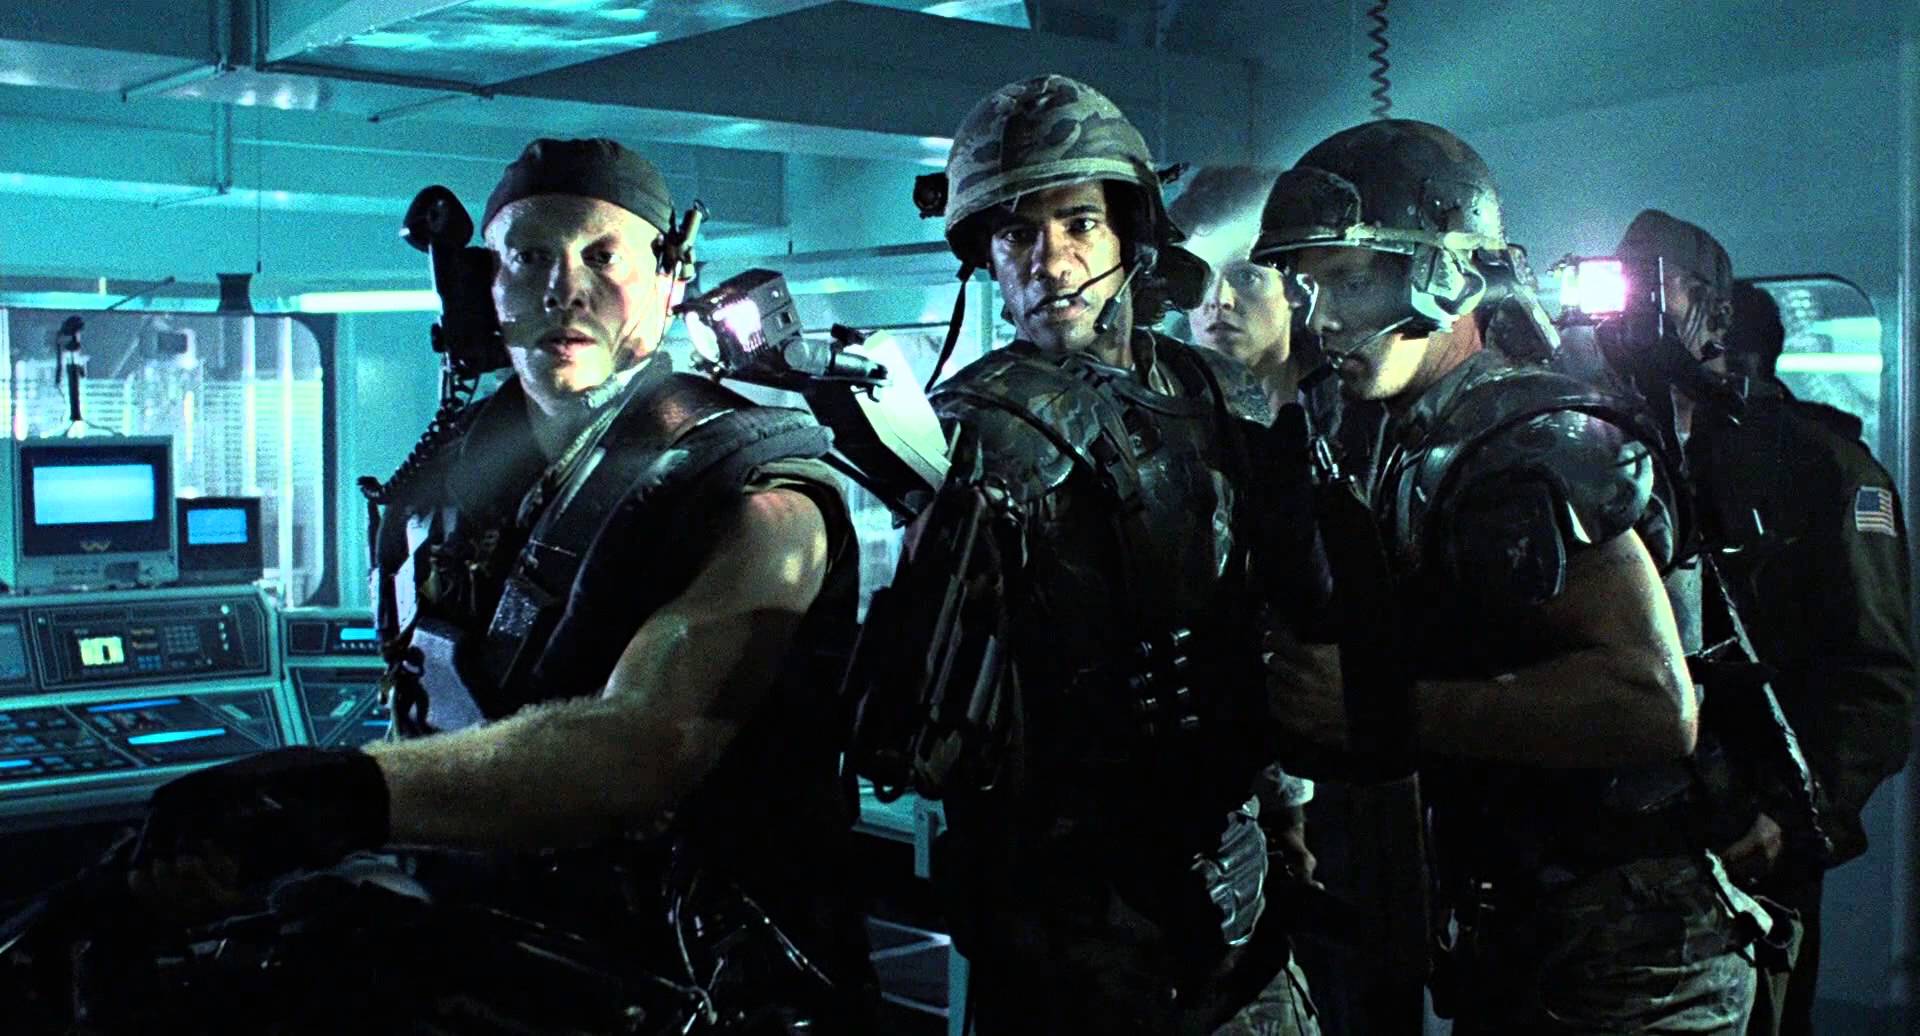 Marines search the colony lab in the 1986 movie Aliens